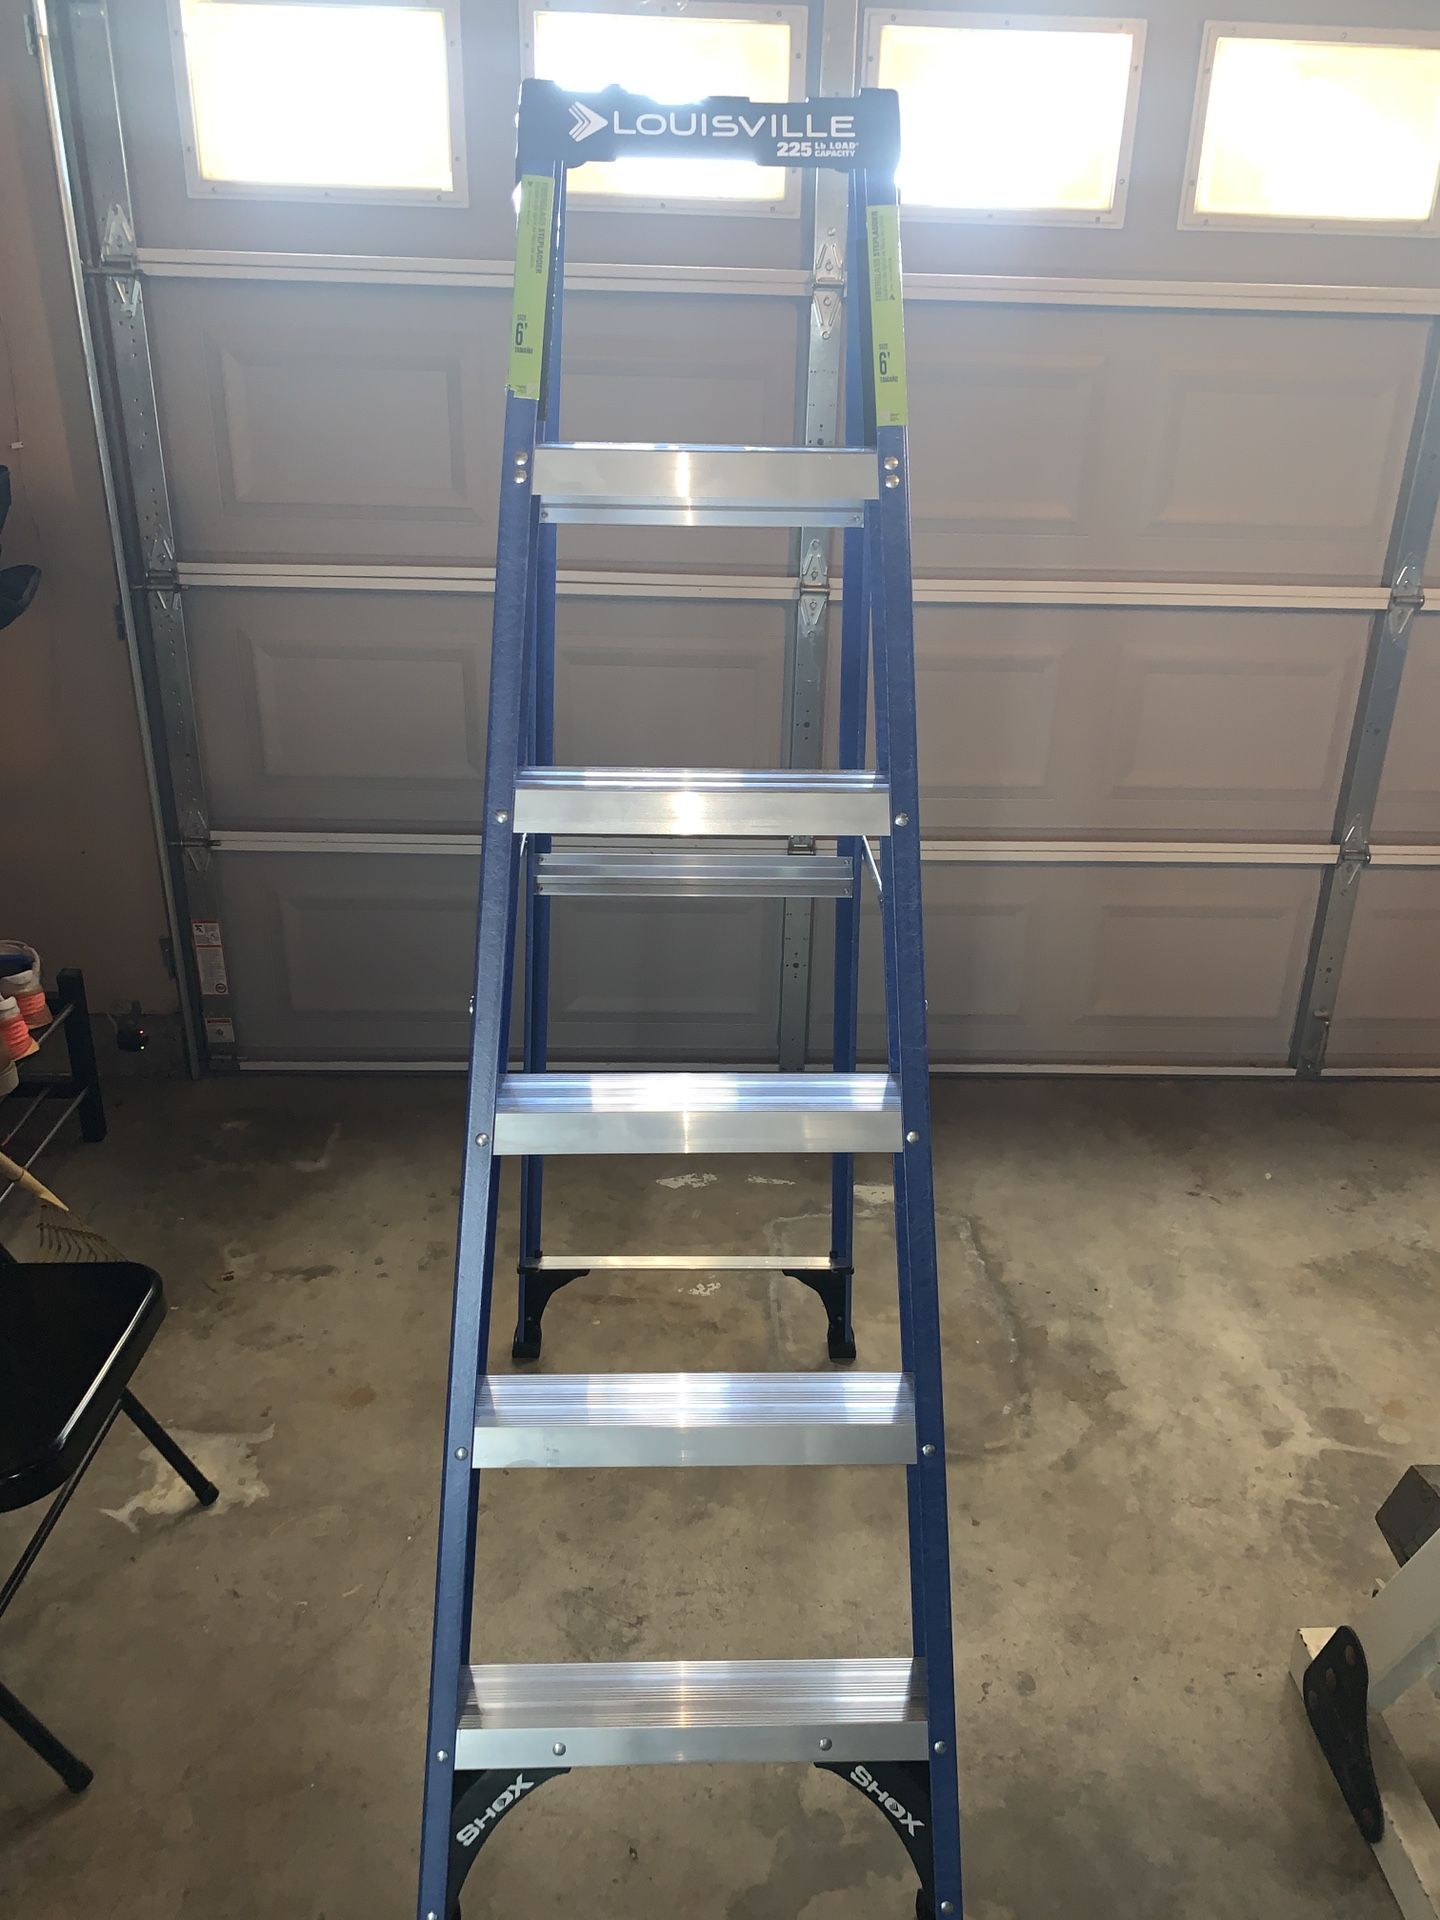 New 6’ Louisville step Ladder. Never used. 225 lbs. $60 Firm.